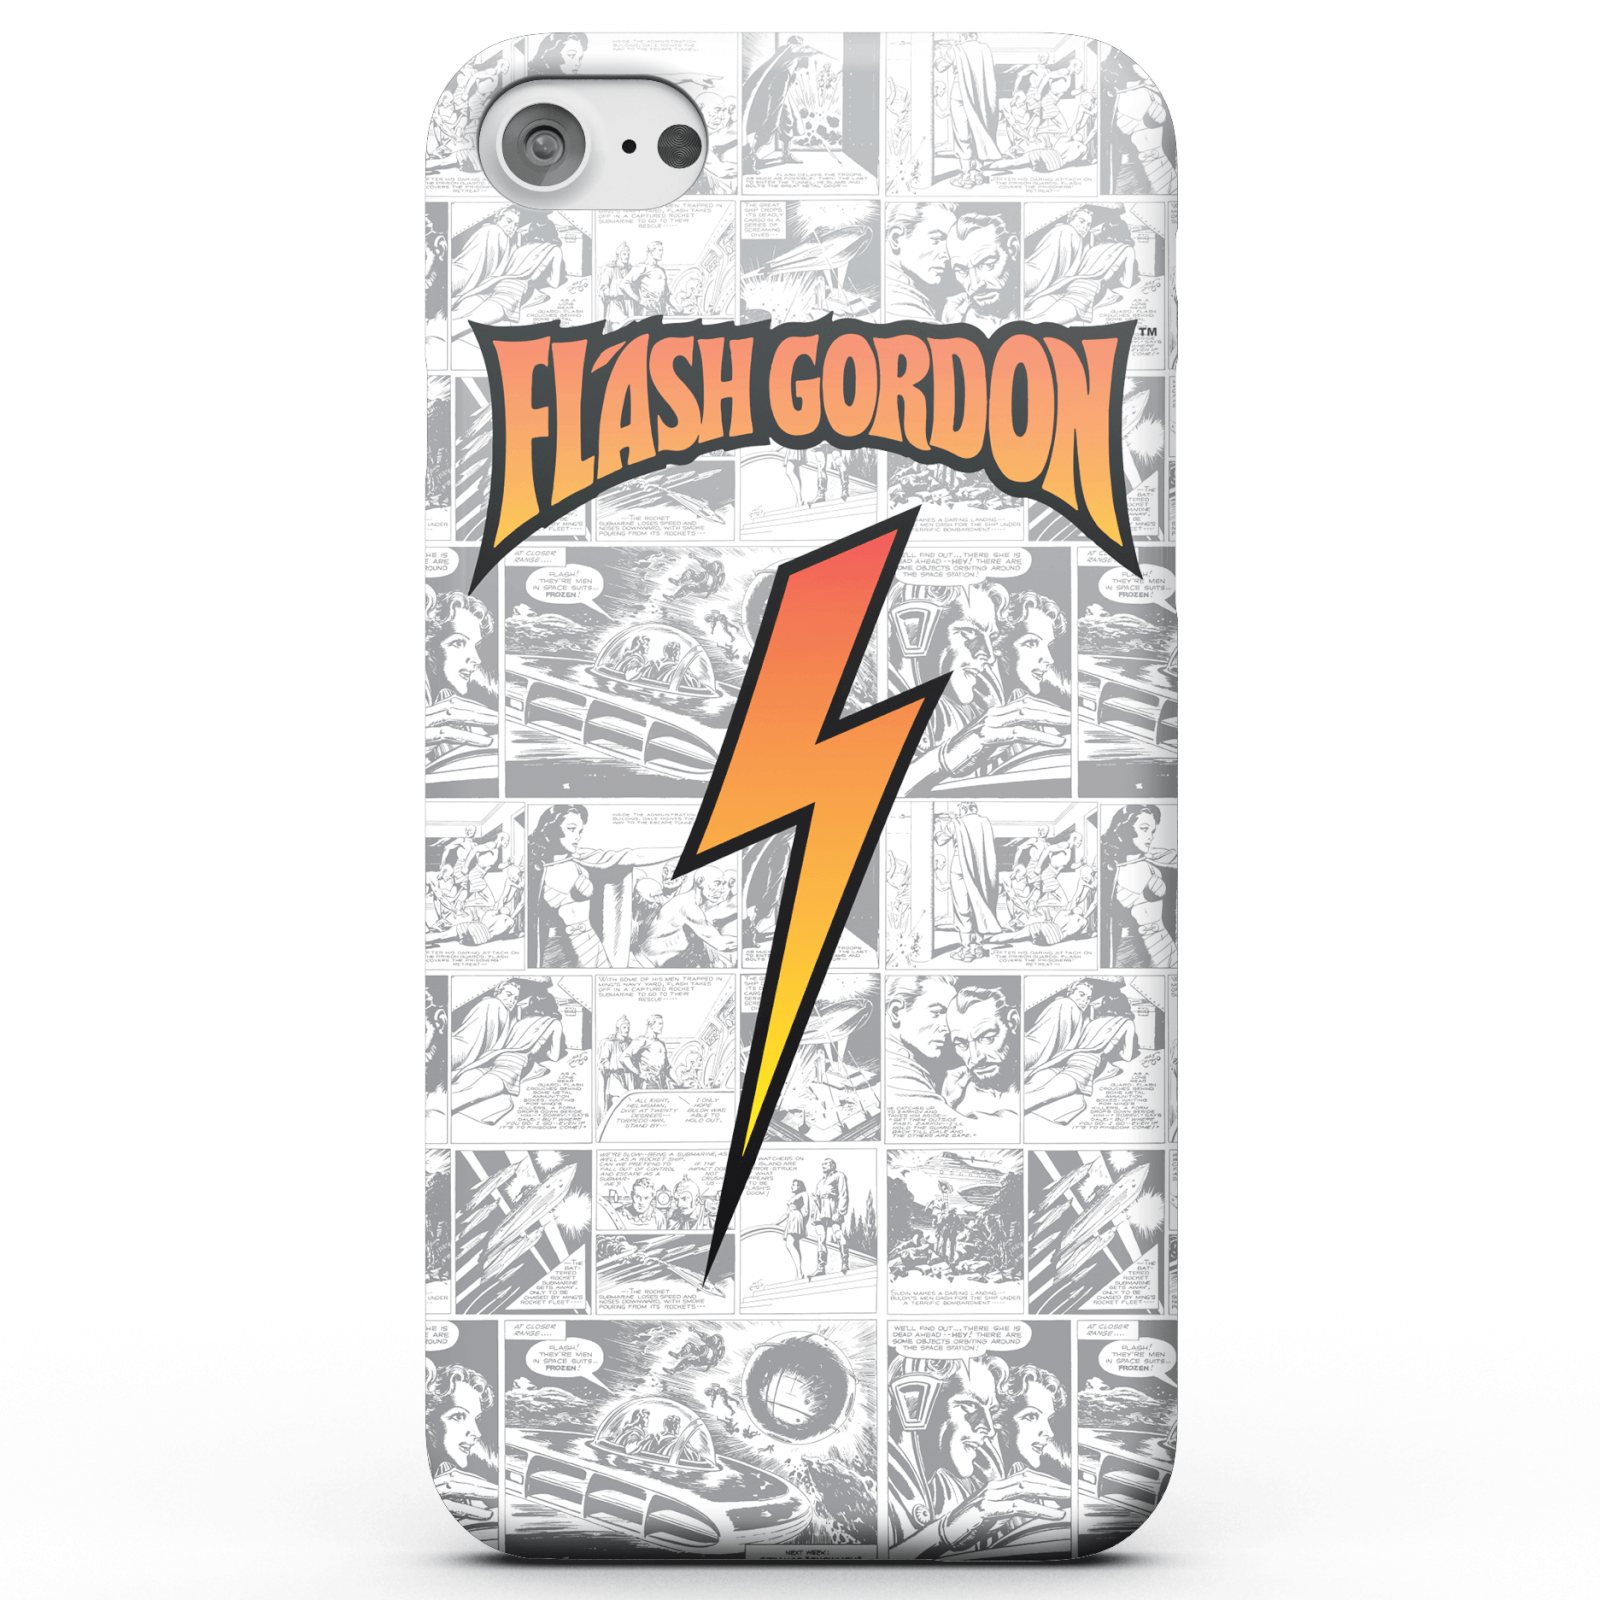 Flash Gordon Comic Strip Phone Case for iPhone and Android - Samsung Note 8 - Snap Case - Gloss